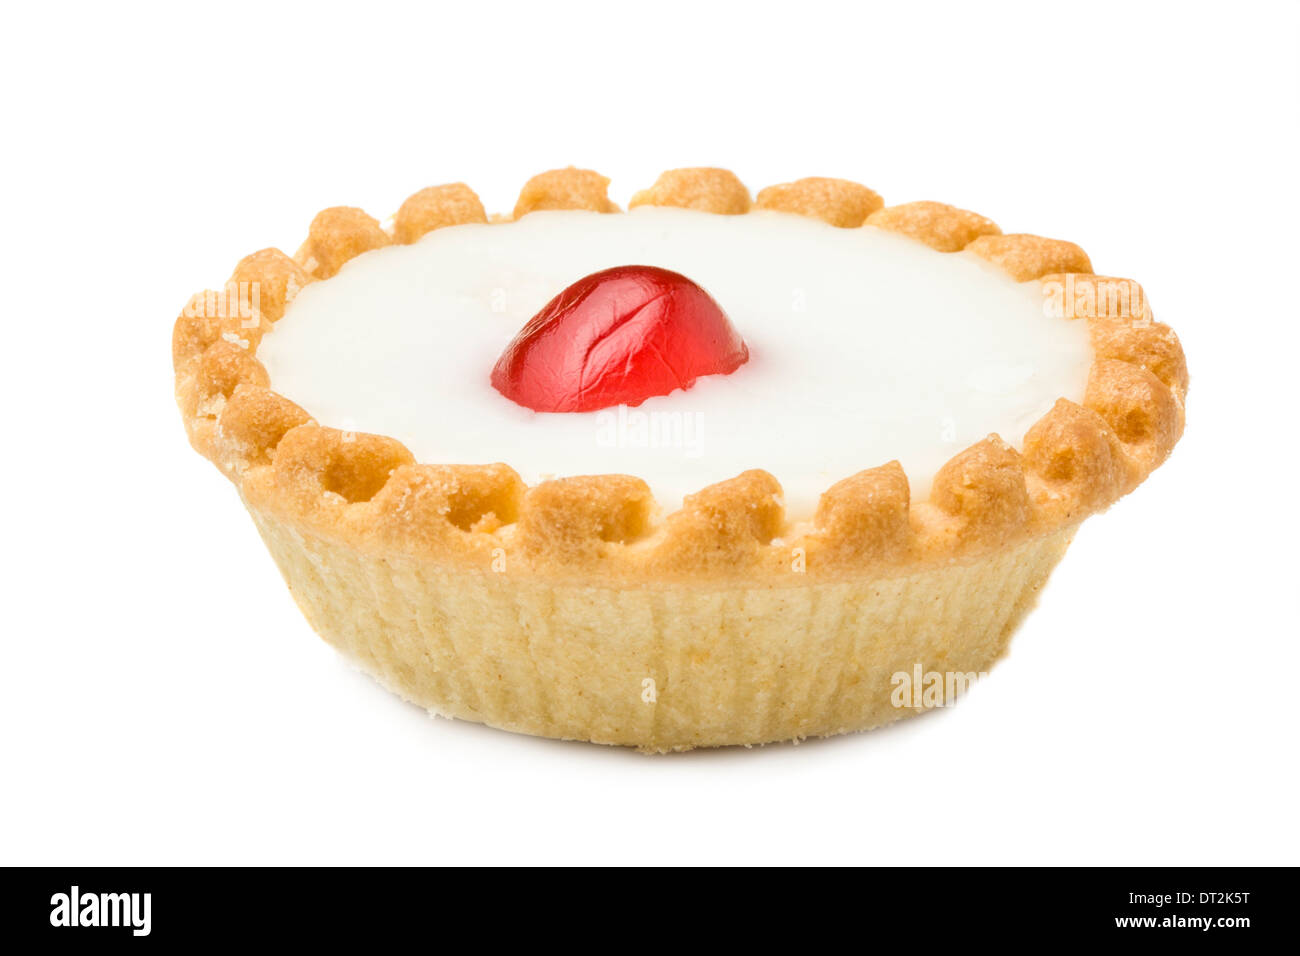 cherry tart cake close up with fondant topping and a candid cherry in the middle The Bakewell Tart is an English confection Stock Photo